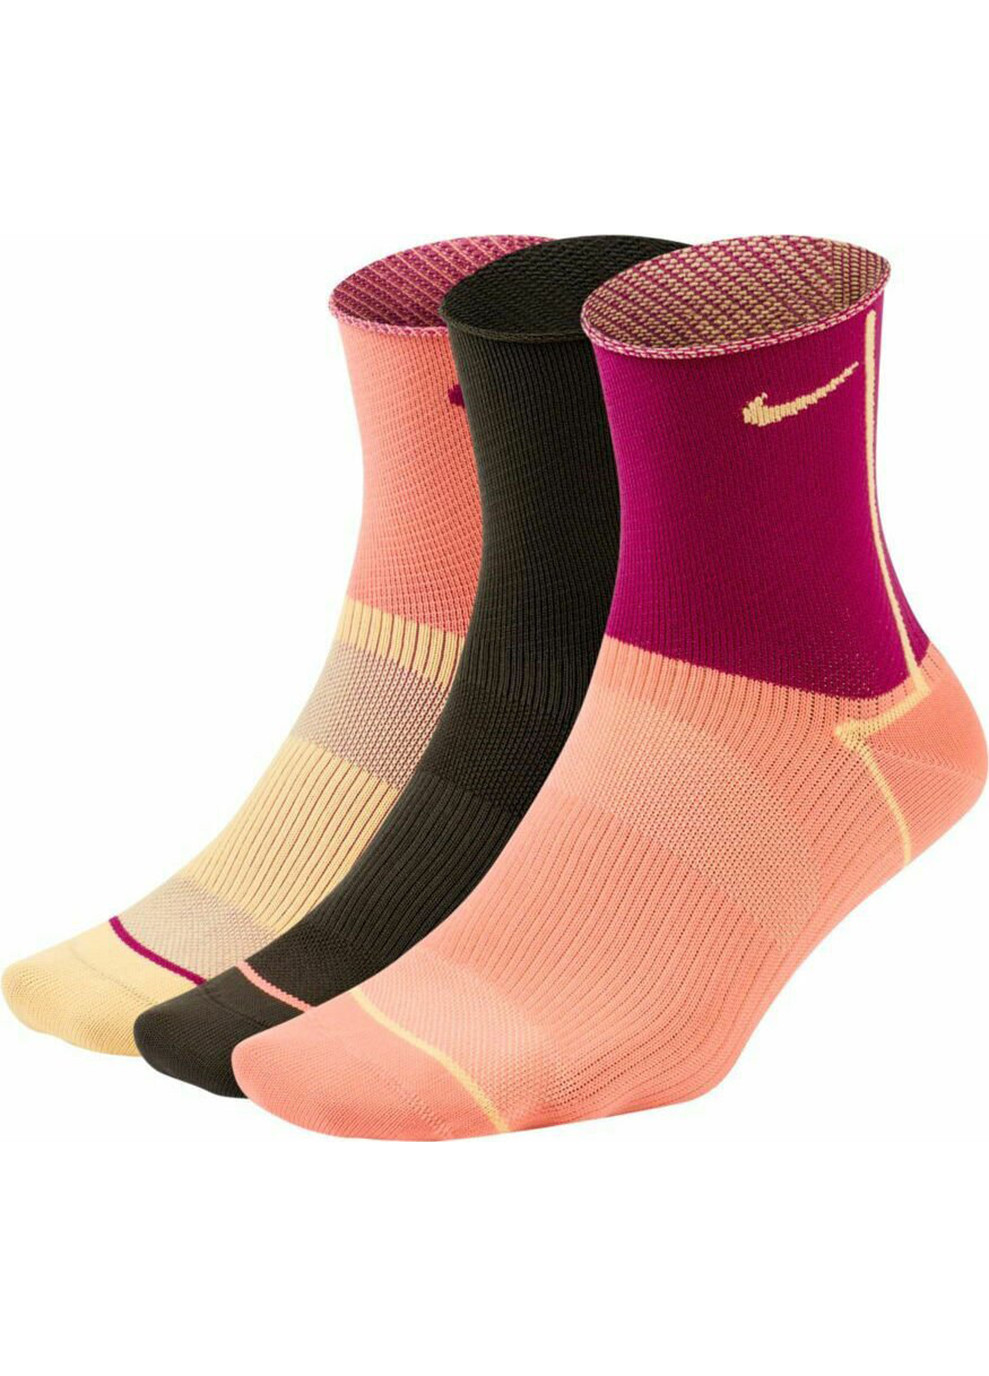 Носки Everyday Plus Lightweight Ankle 3-pack 34-38 black/pink/yellow Nike (259296554)